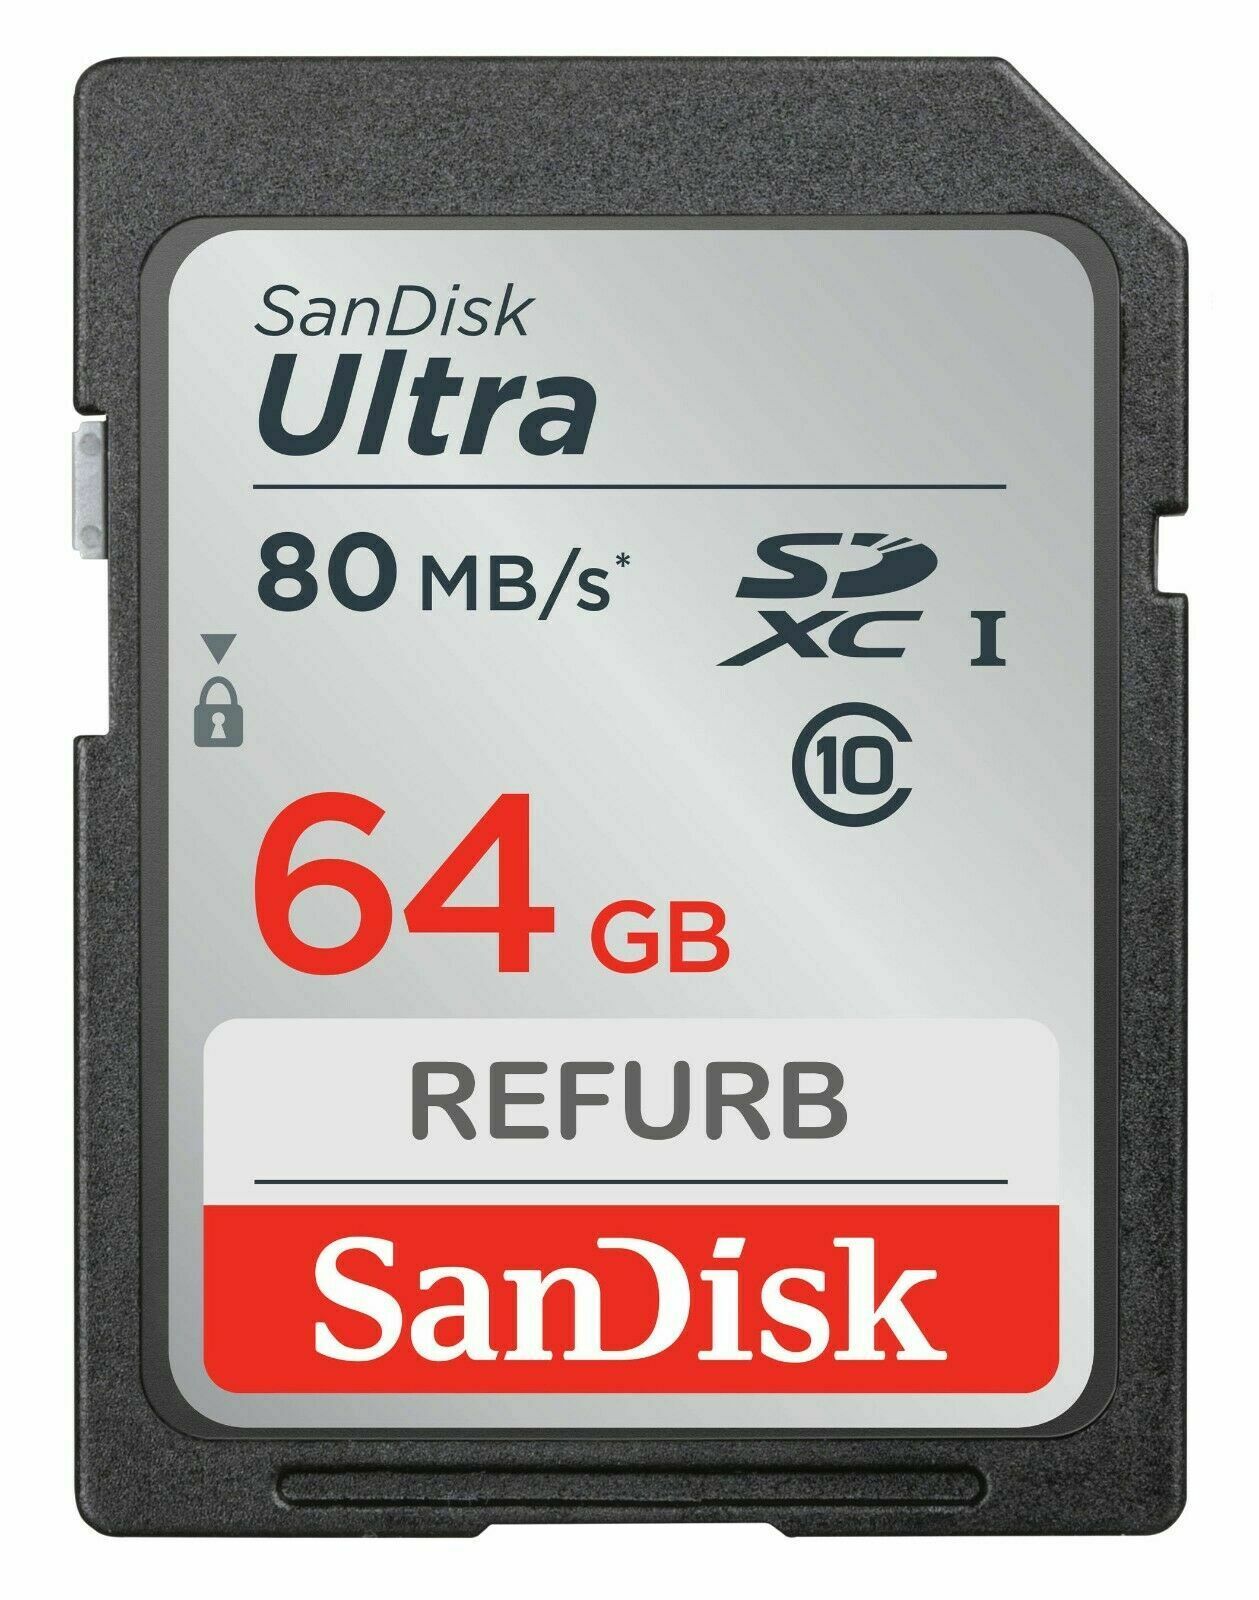 SanDisk 64GB Ultra Class 10 UHS-I SD 80MBs SDHC / SDXC Memorycard (Re-certified)